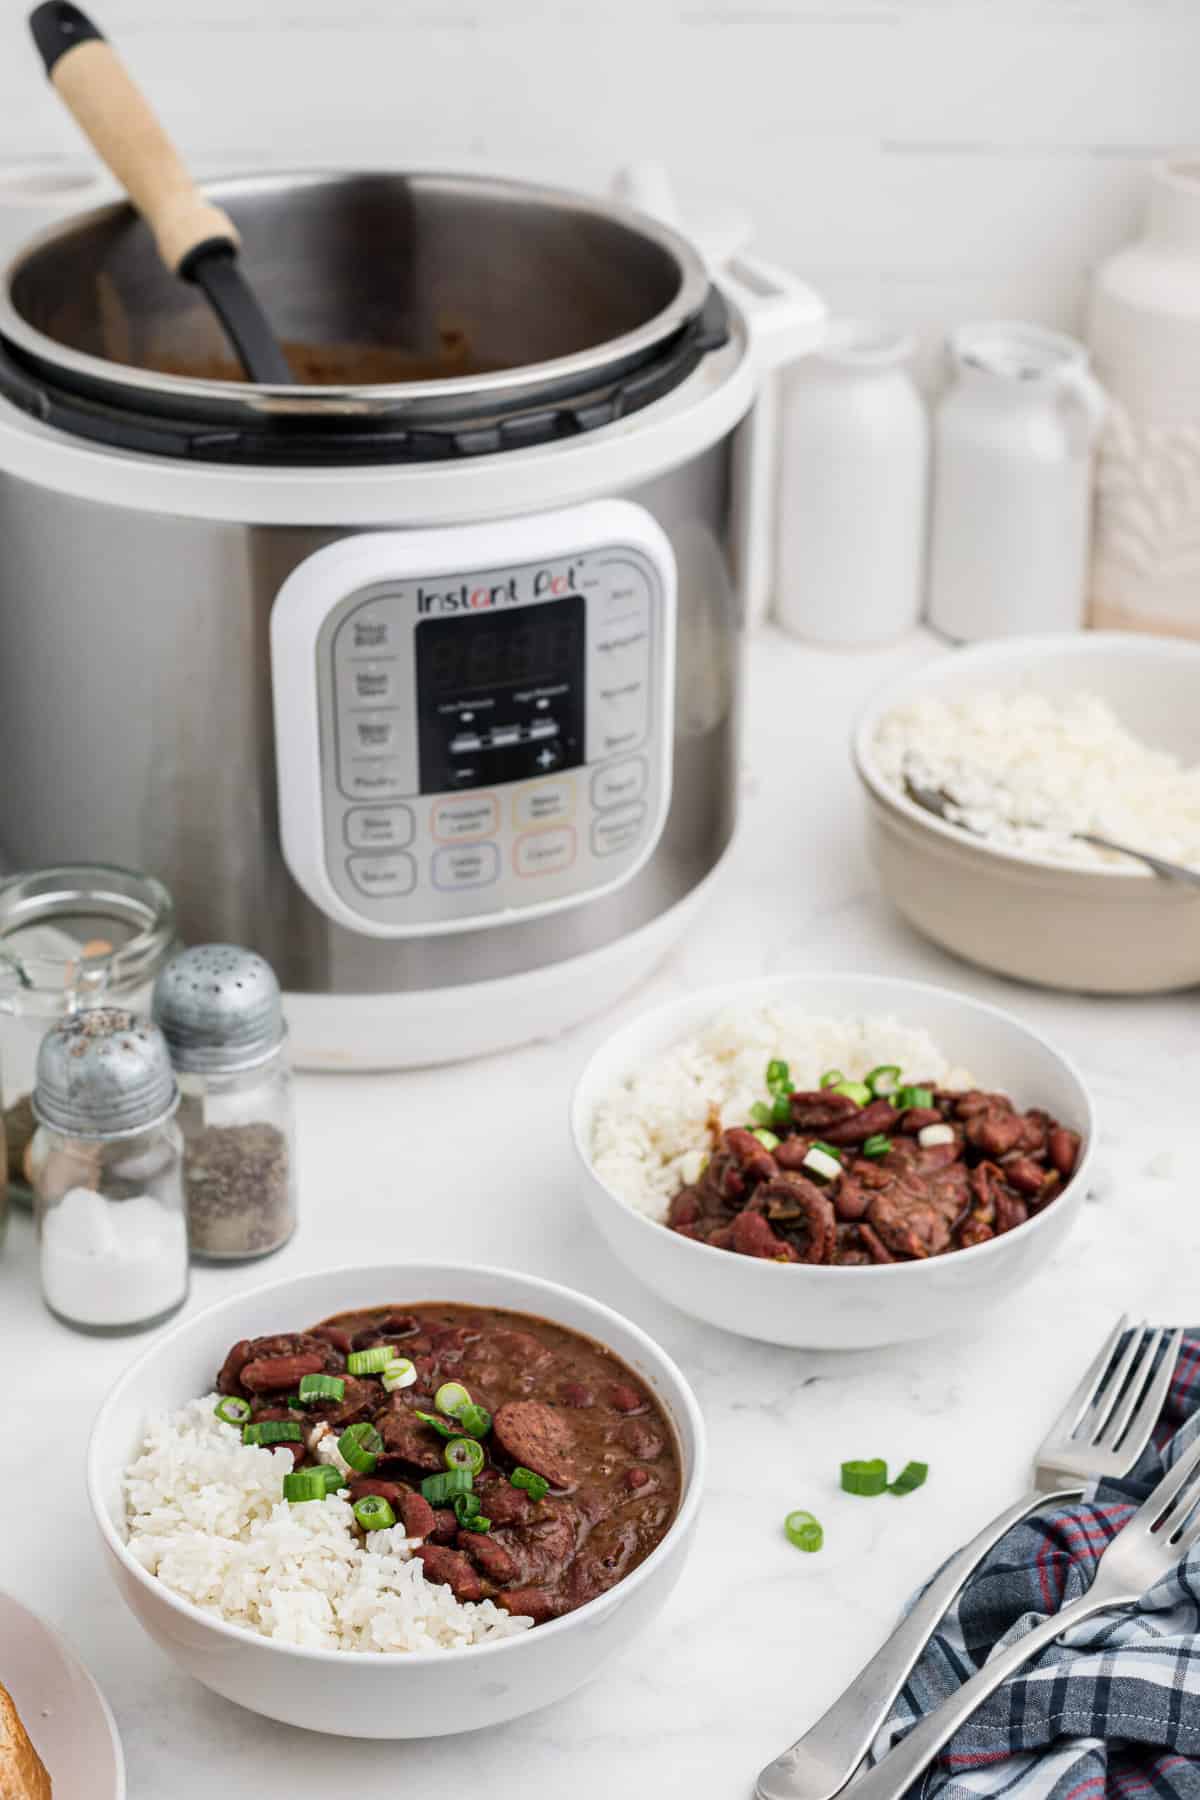 The instant pot is placed behind two full bowls of cooked red beans and rice.